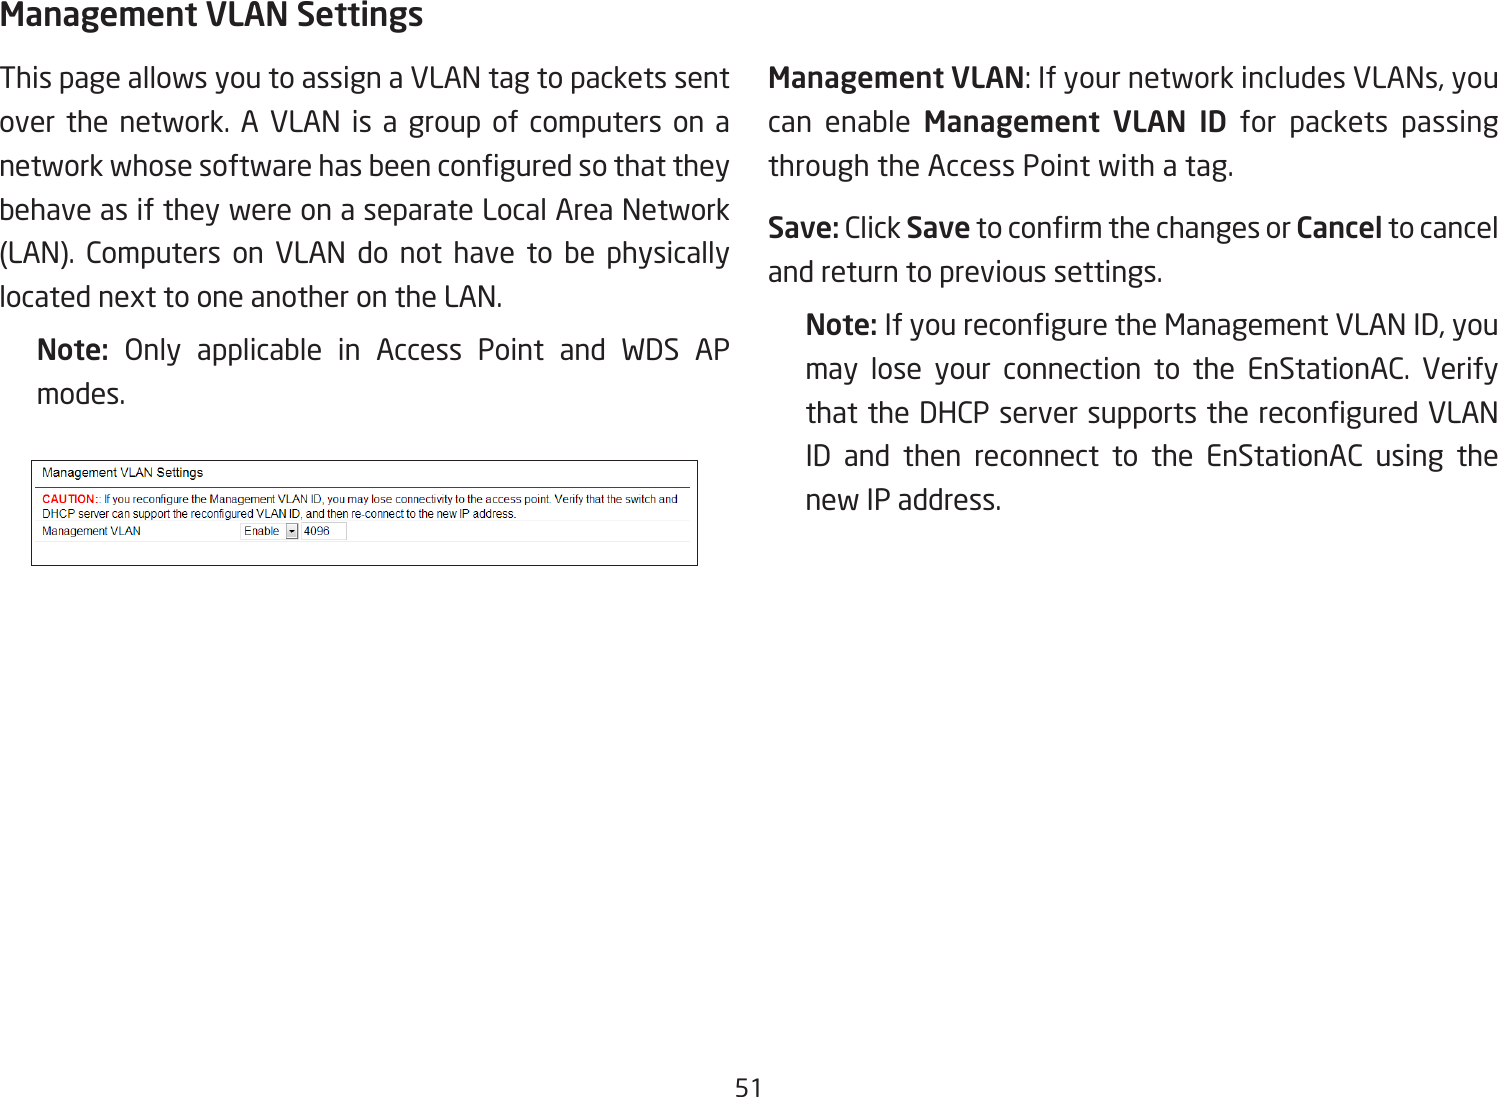 51Management VLAN SettingsThis page allows you to assign a VLAN tag to packets sent over the network. A VLAN is a group of computers on a networkwhosesoftwarehasbeenconguredsothattheybehave as if they were on a separate Local Area Network (LAN). Computers on VLAN do not have to be physicallylocated next to one another on the LAN.Note:  Only applicable in Access Point and WDS APmodes.     Management VLAN: If your network includes VLANs, you can enable Management VLAN ID for packets passing through the Access Point with a tag. Save: Click SavetoconrmthechangesorCancel to cancel and return to previous settings.Note: IfyoureconguretheManagementVLANID,youmay lose your connection to the EnStationAC. Verify thattheDHCPserversupportsthereconguredVLANID and then reconnect to the EnStationAC using the new IP address. 